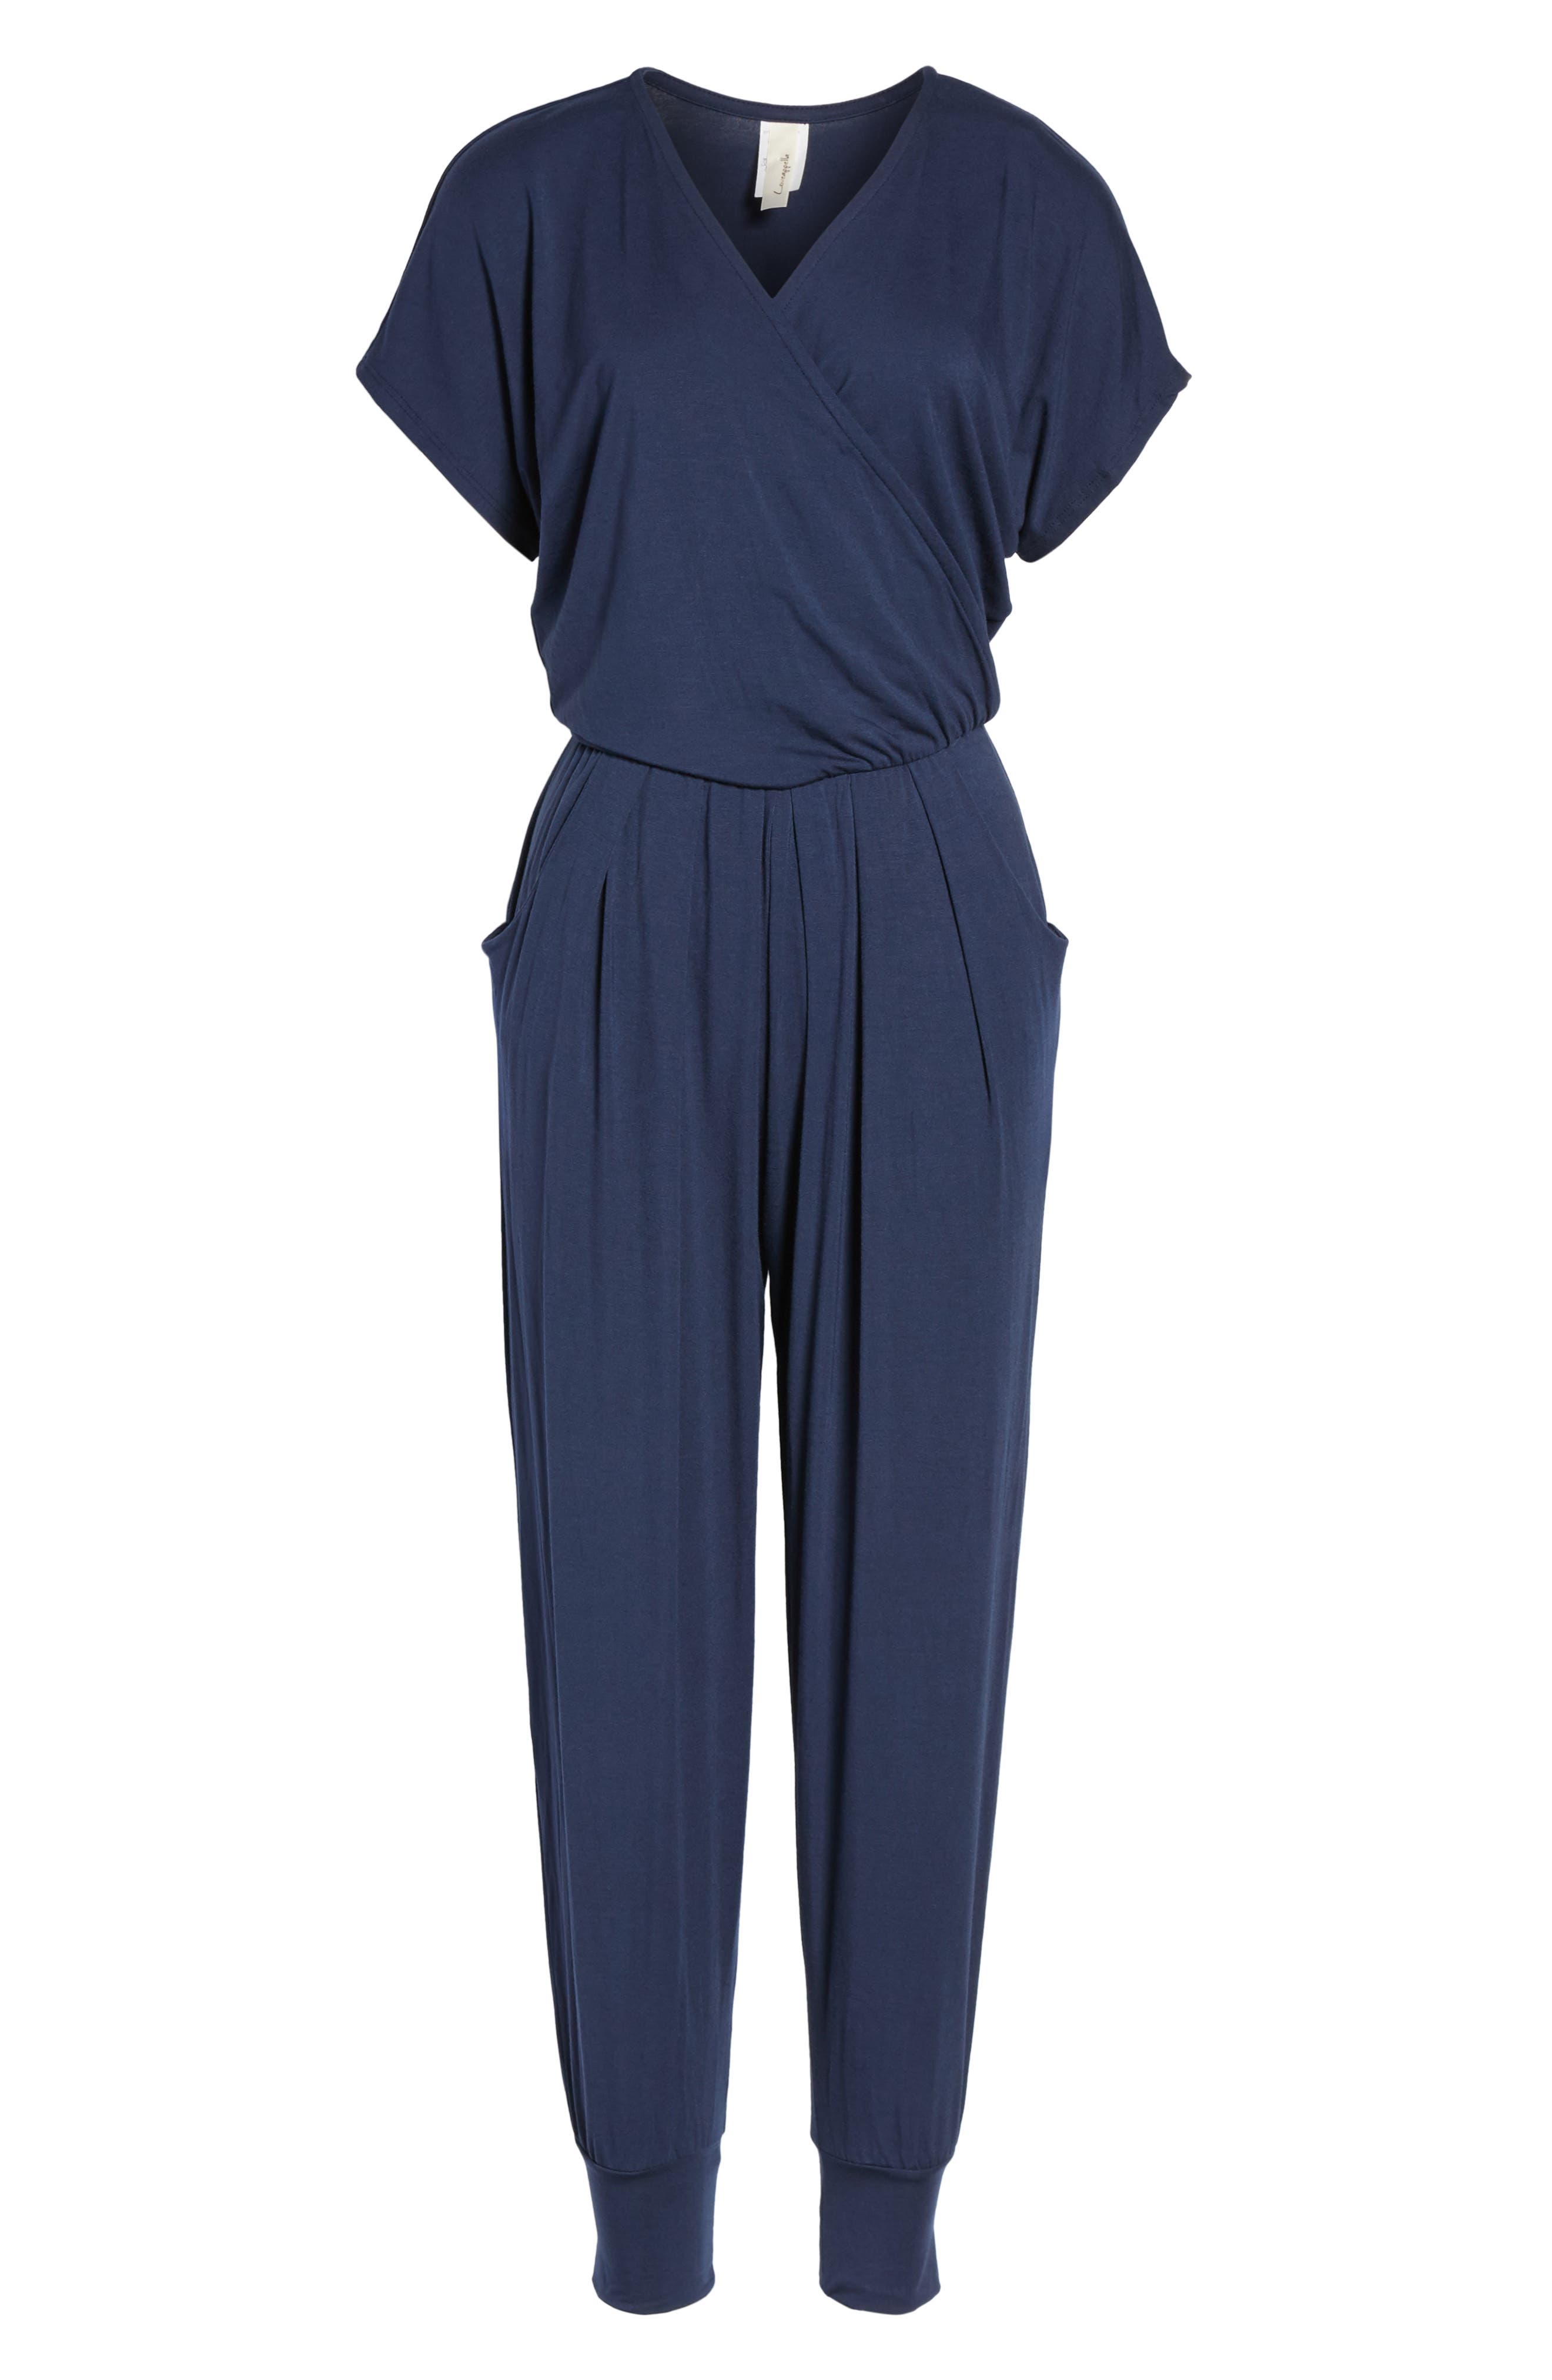 Blue Jumpsuits ☀ Rompers for Women ...